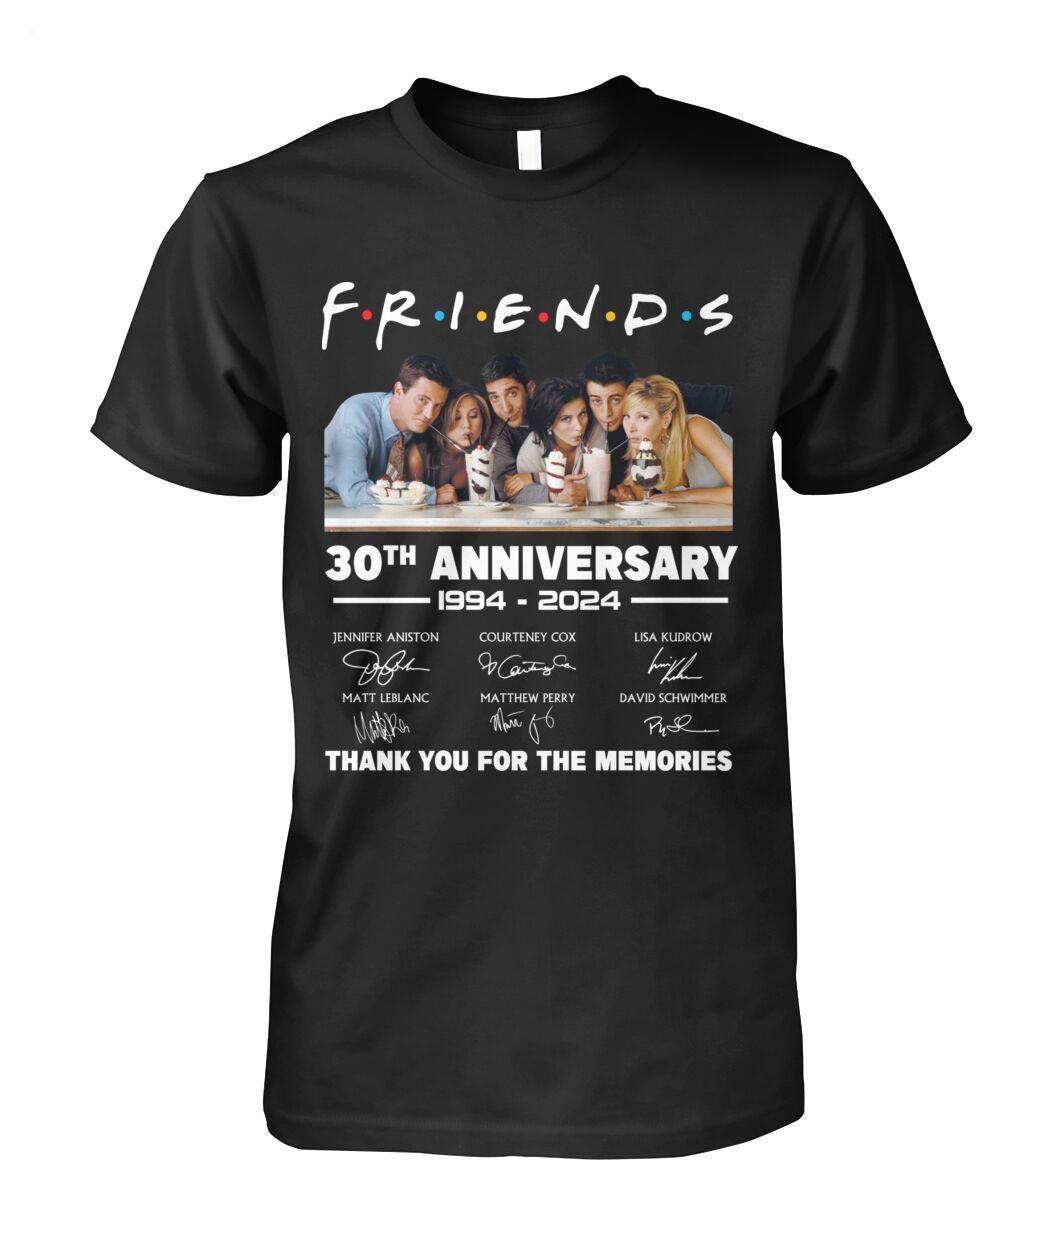 Congratulations to Our 30th Anniversary T-Shirt Winners!